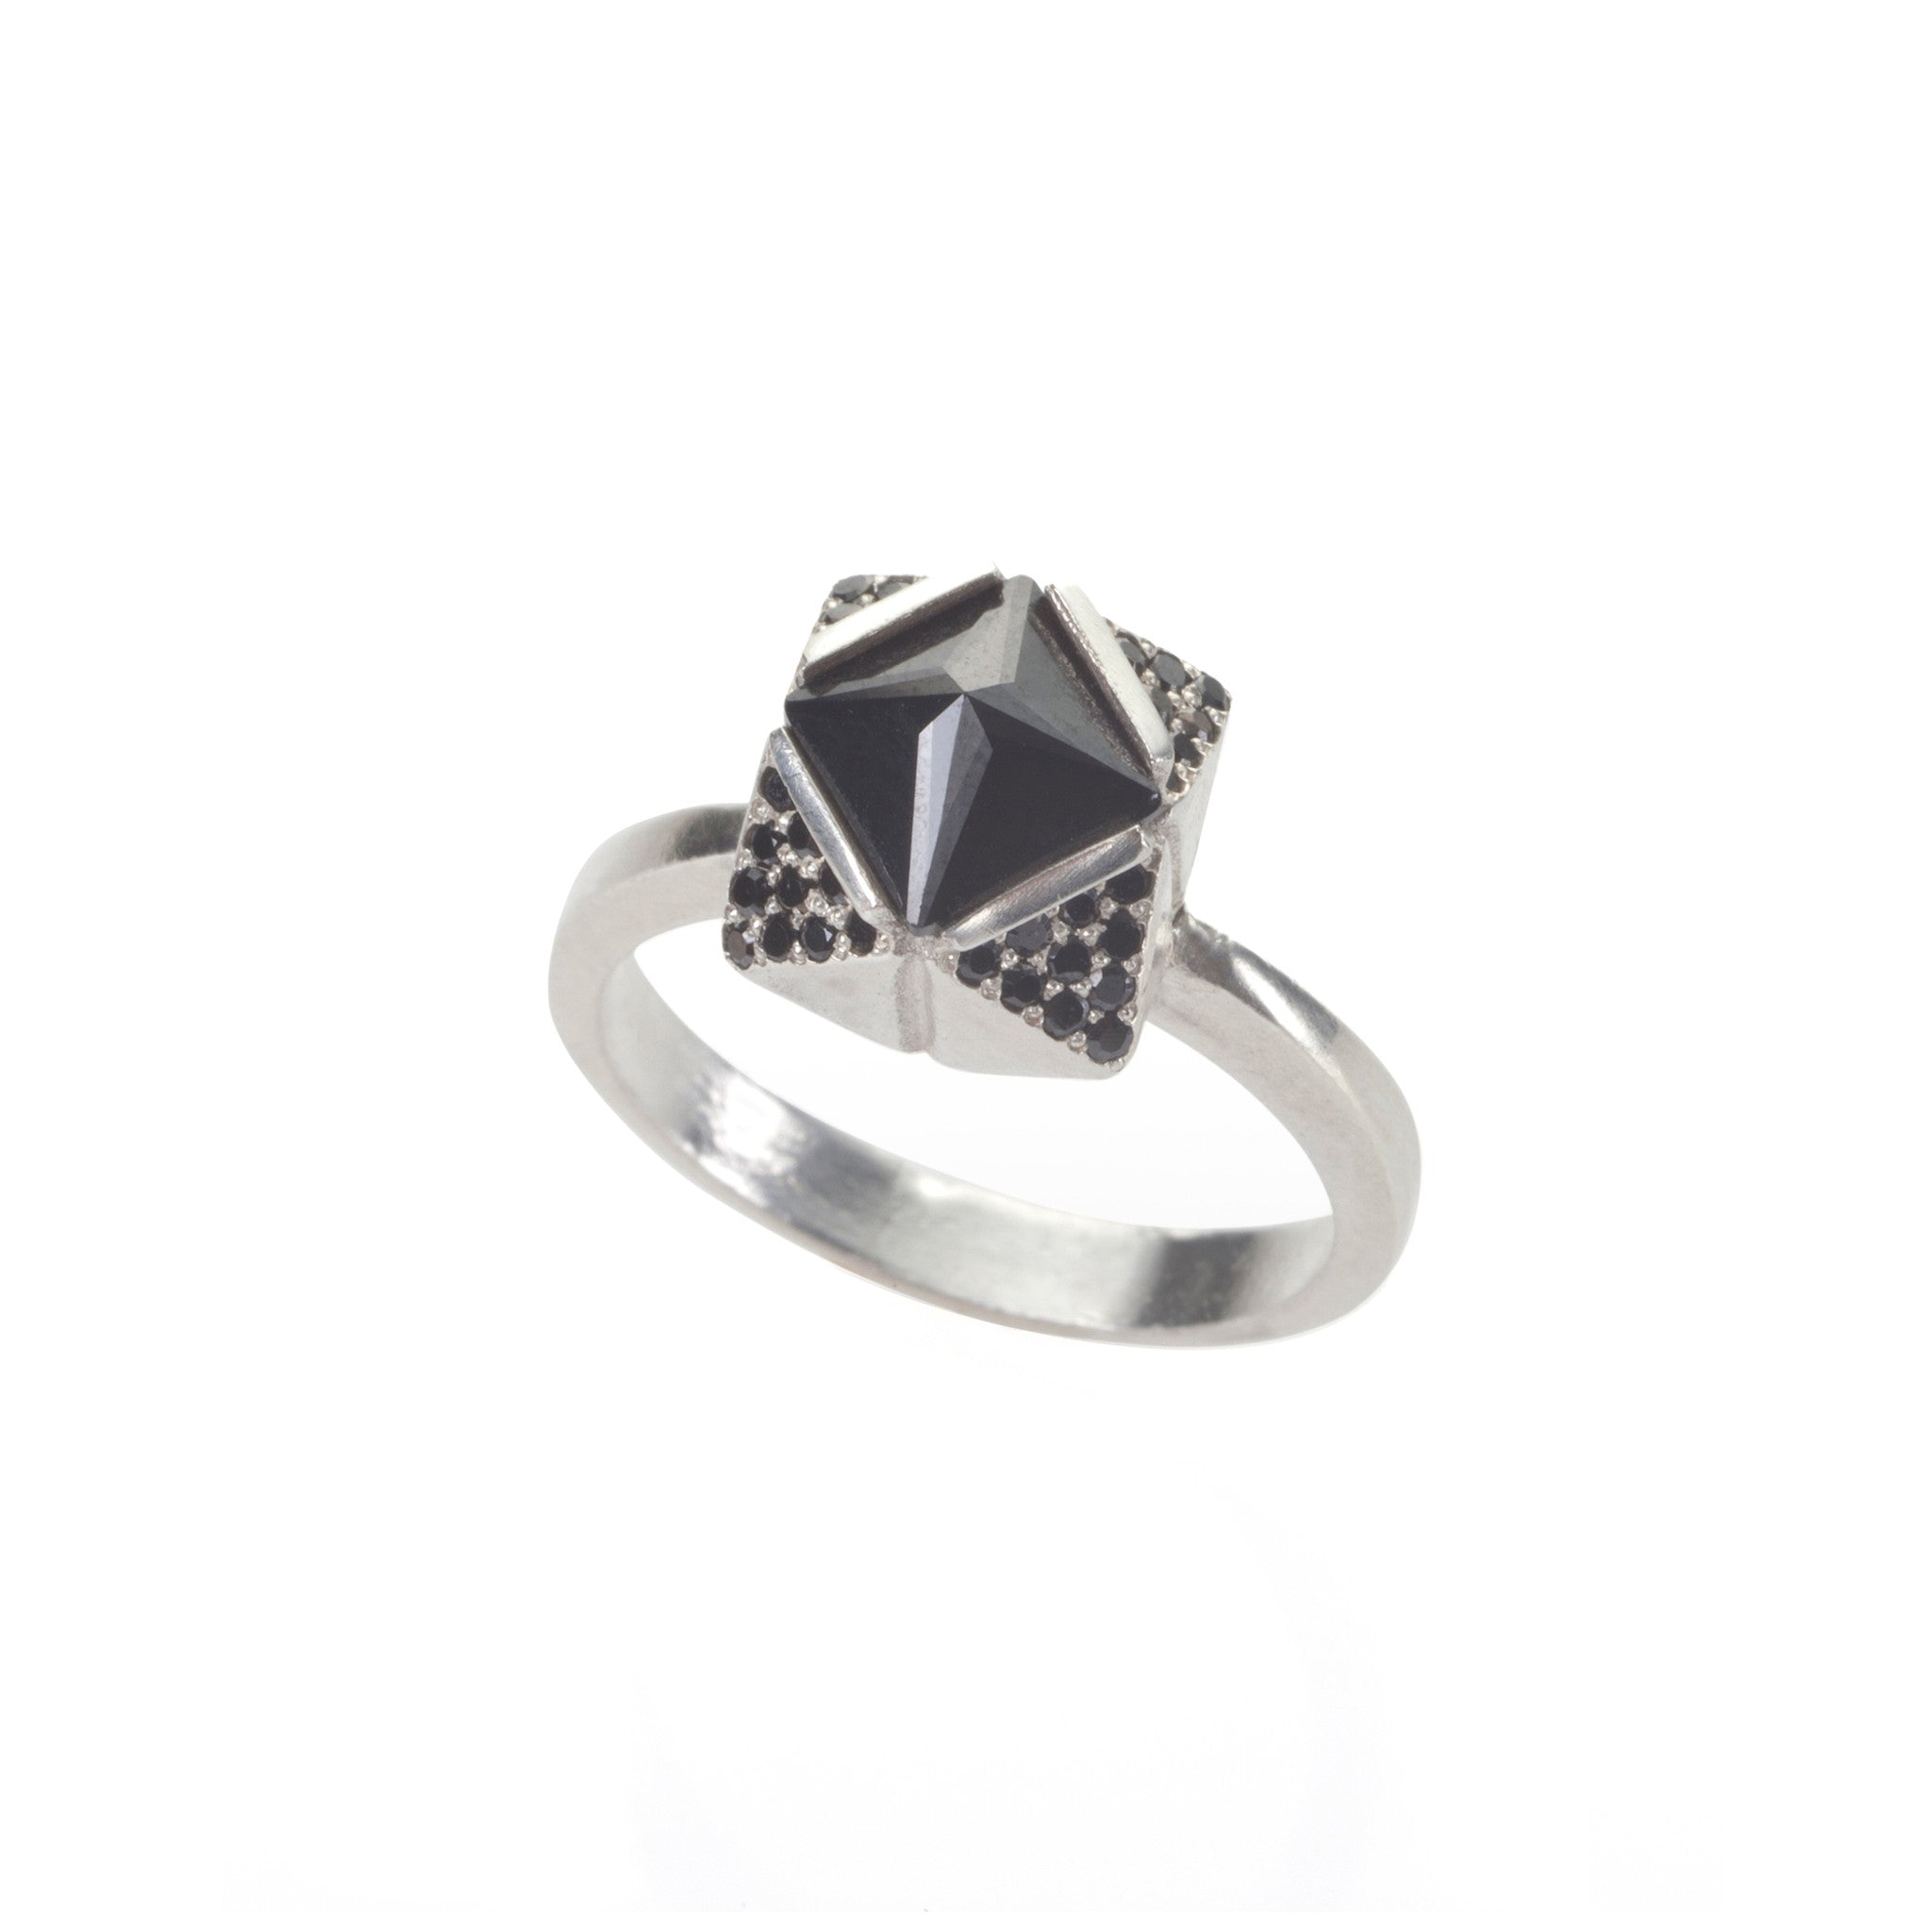 silver ring with black stones